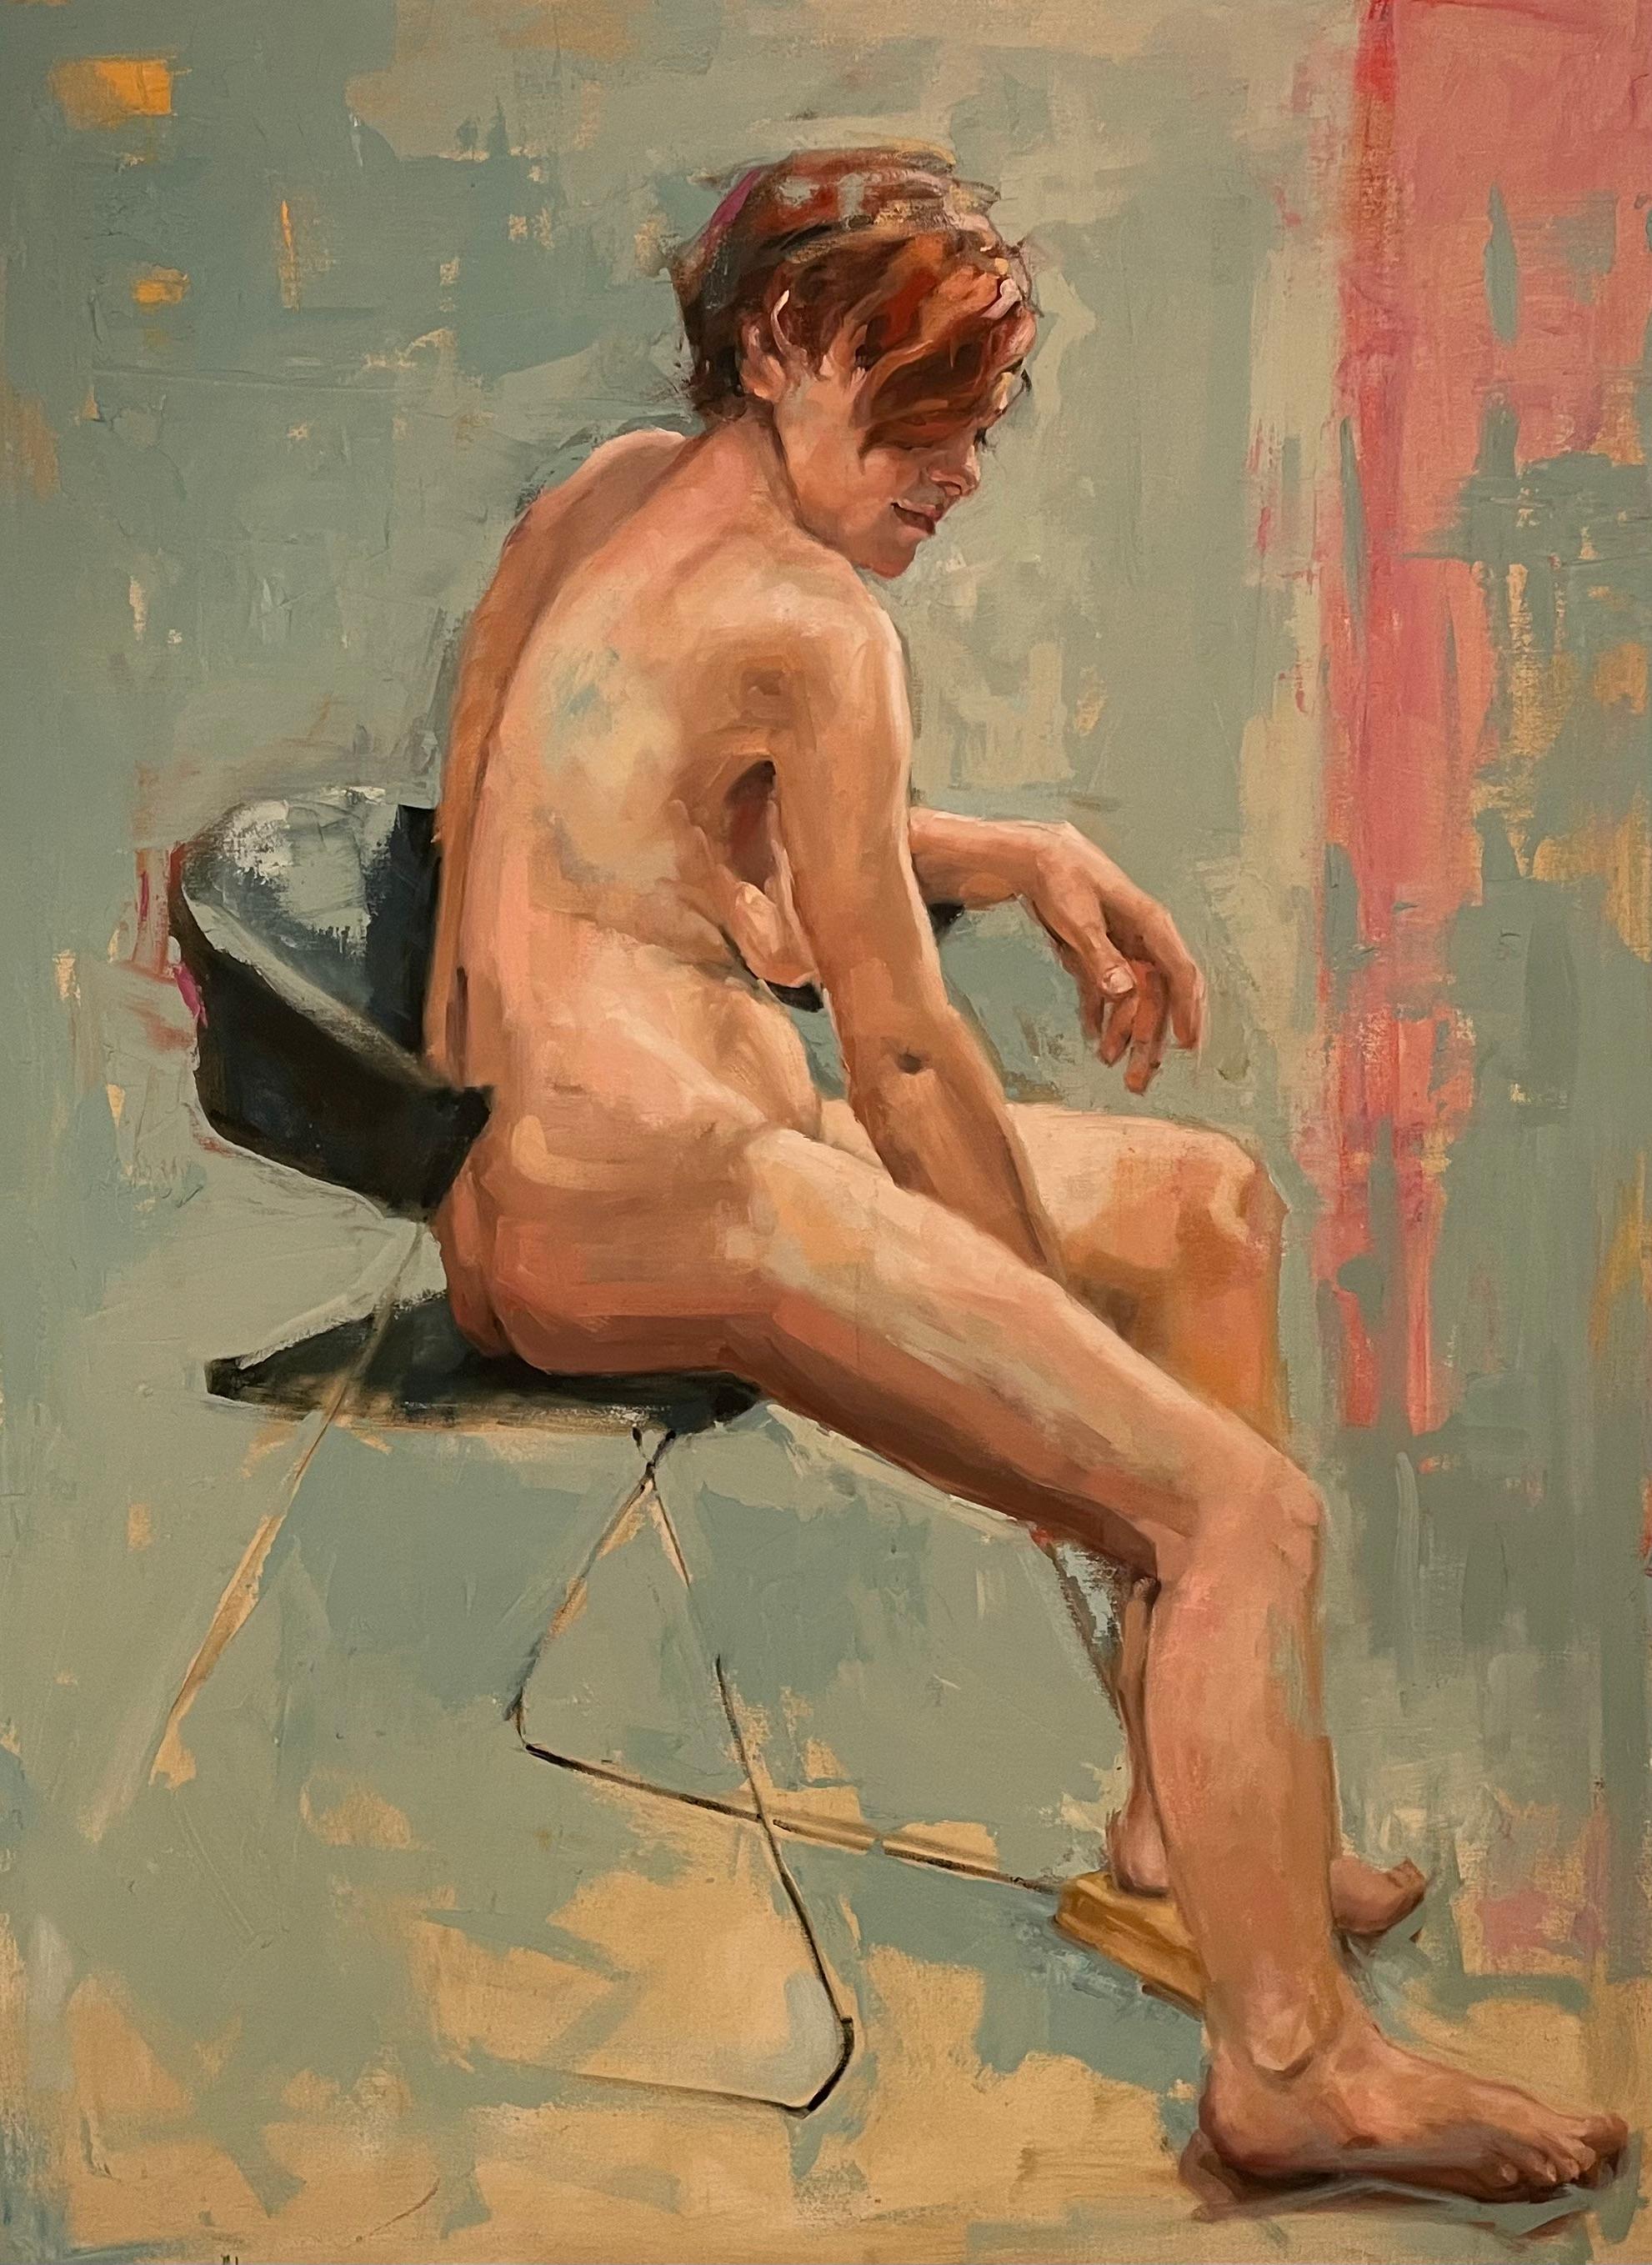 In "Nude Woman Seated," a 40" x 30" oil on wood panel by Shana Wilson, there is an intimate portrayal of vulnerability and quiet strength. The artist employs a soft, earth-toned palette, with shades of warm beige, muted greens, and accents of coral,